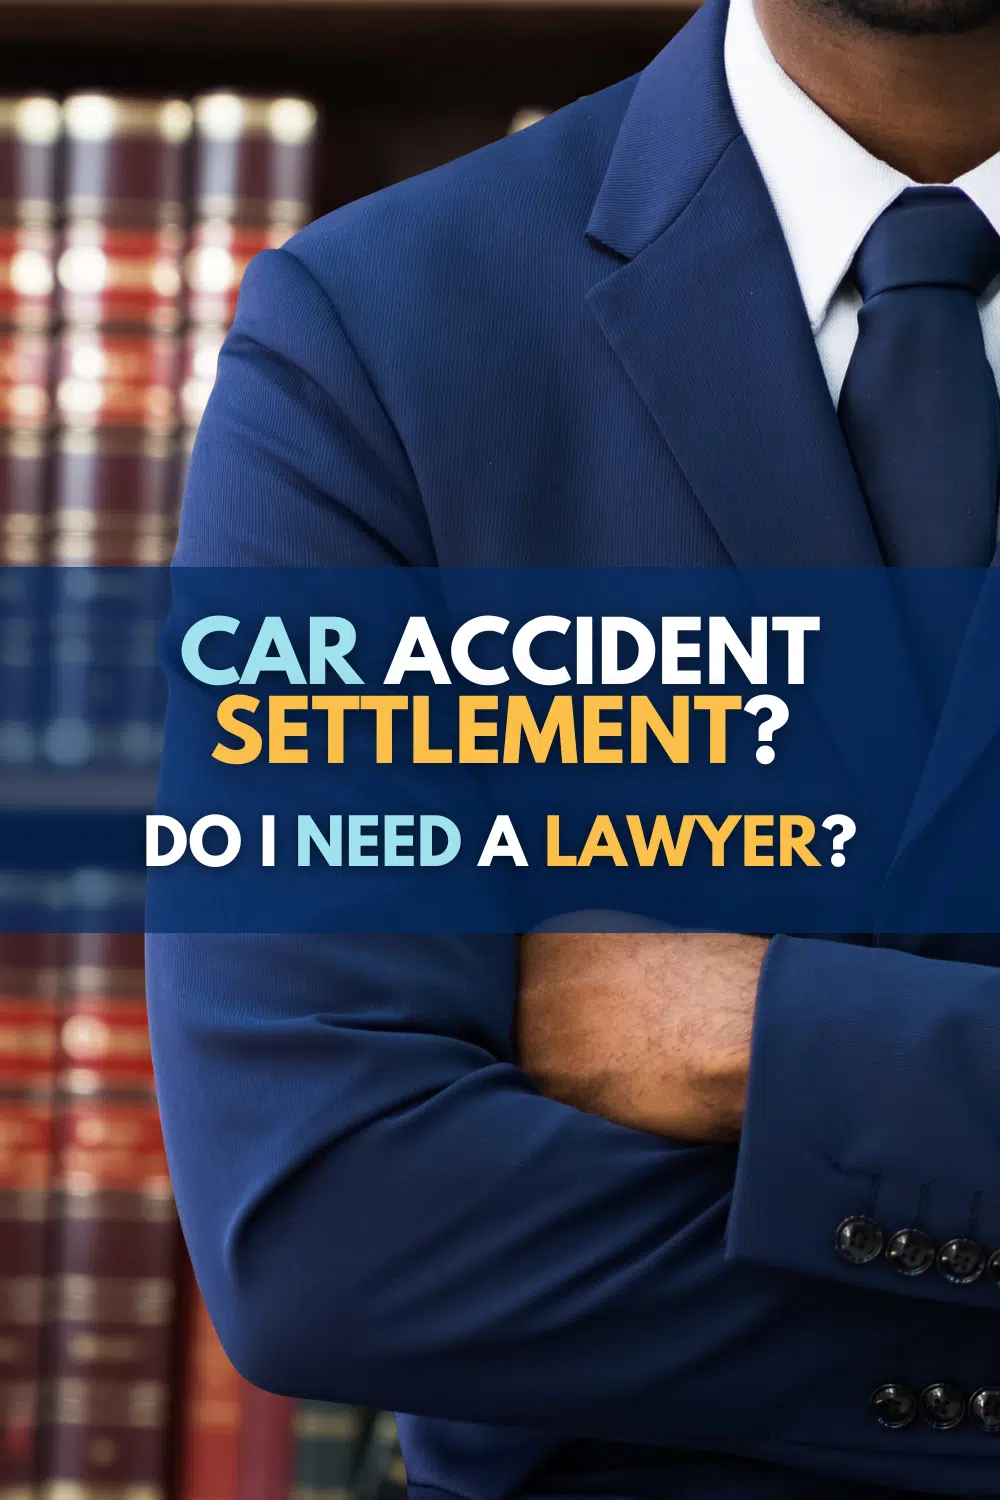 Do I Need A Lawyer For A Car Accident Settlement?